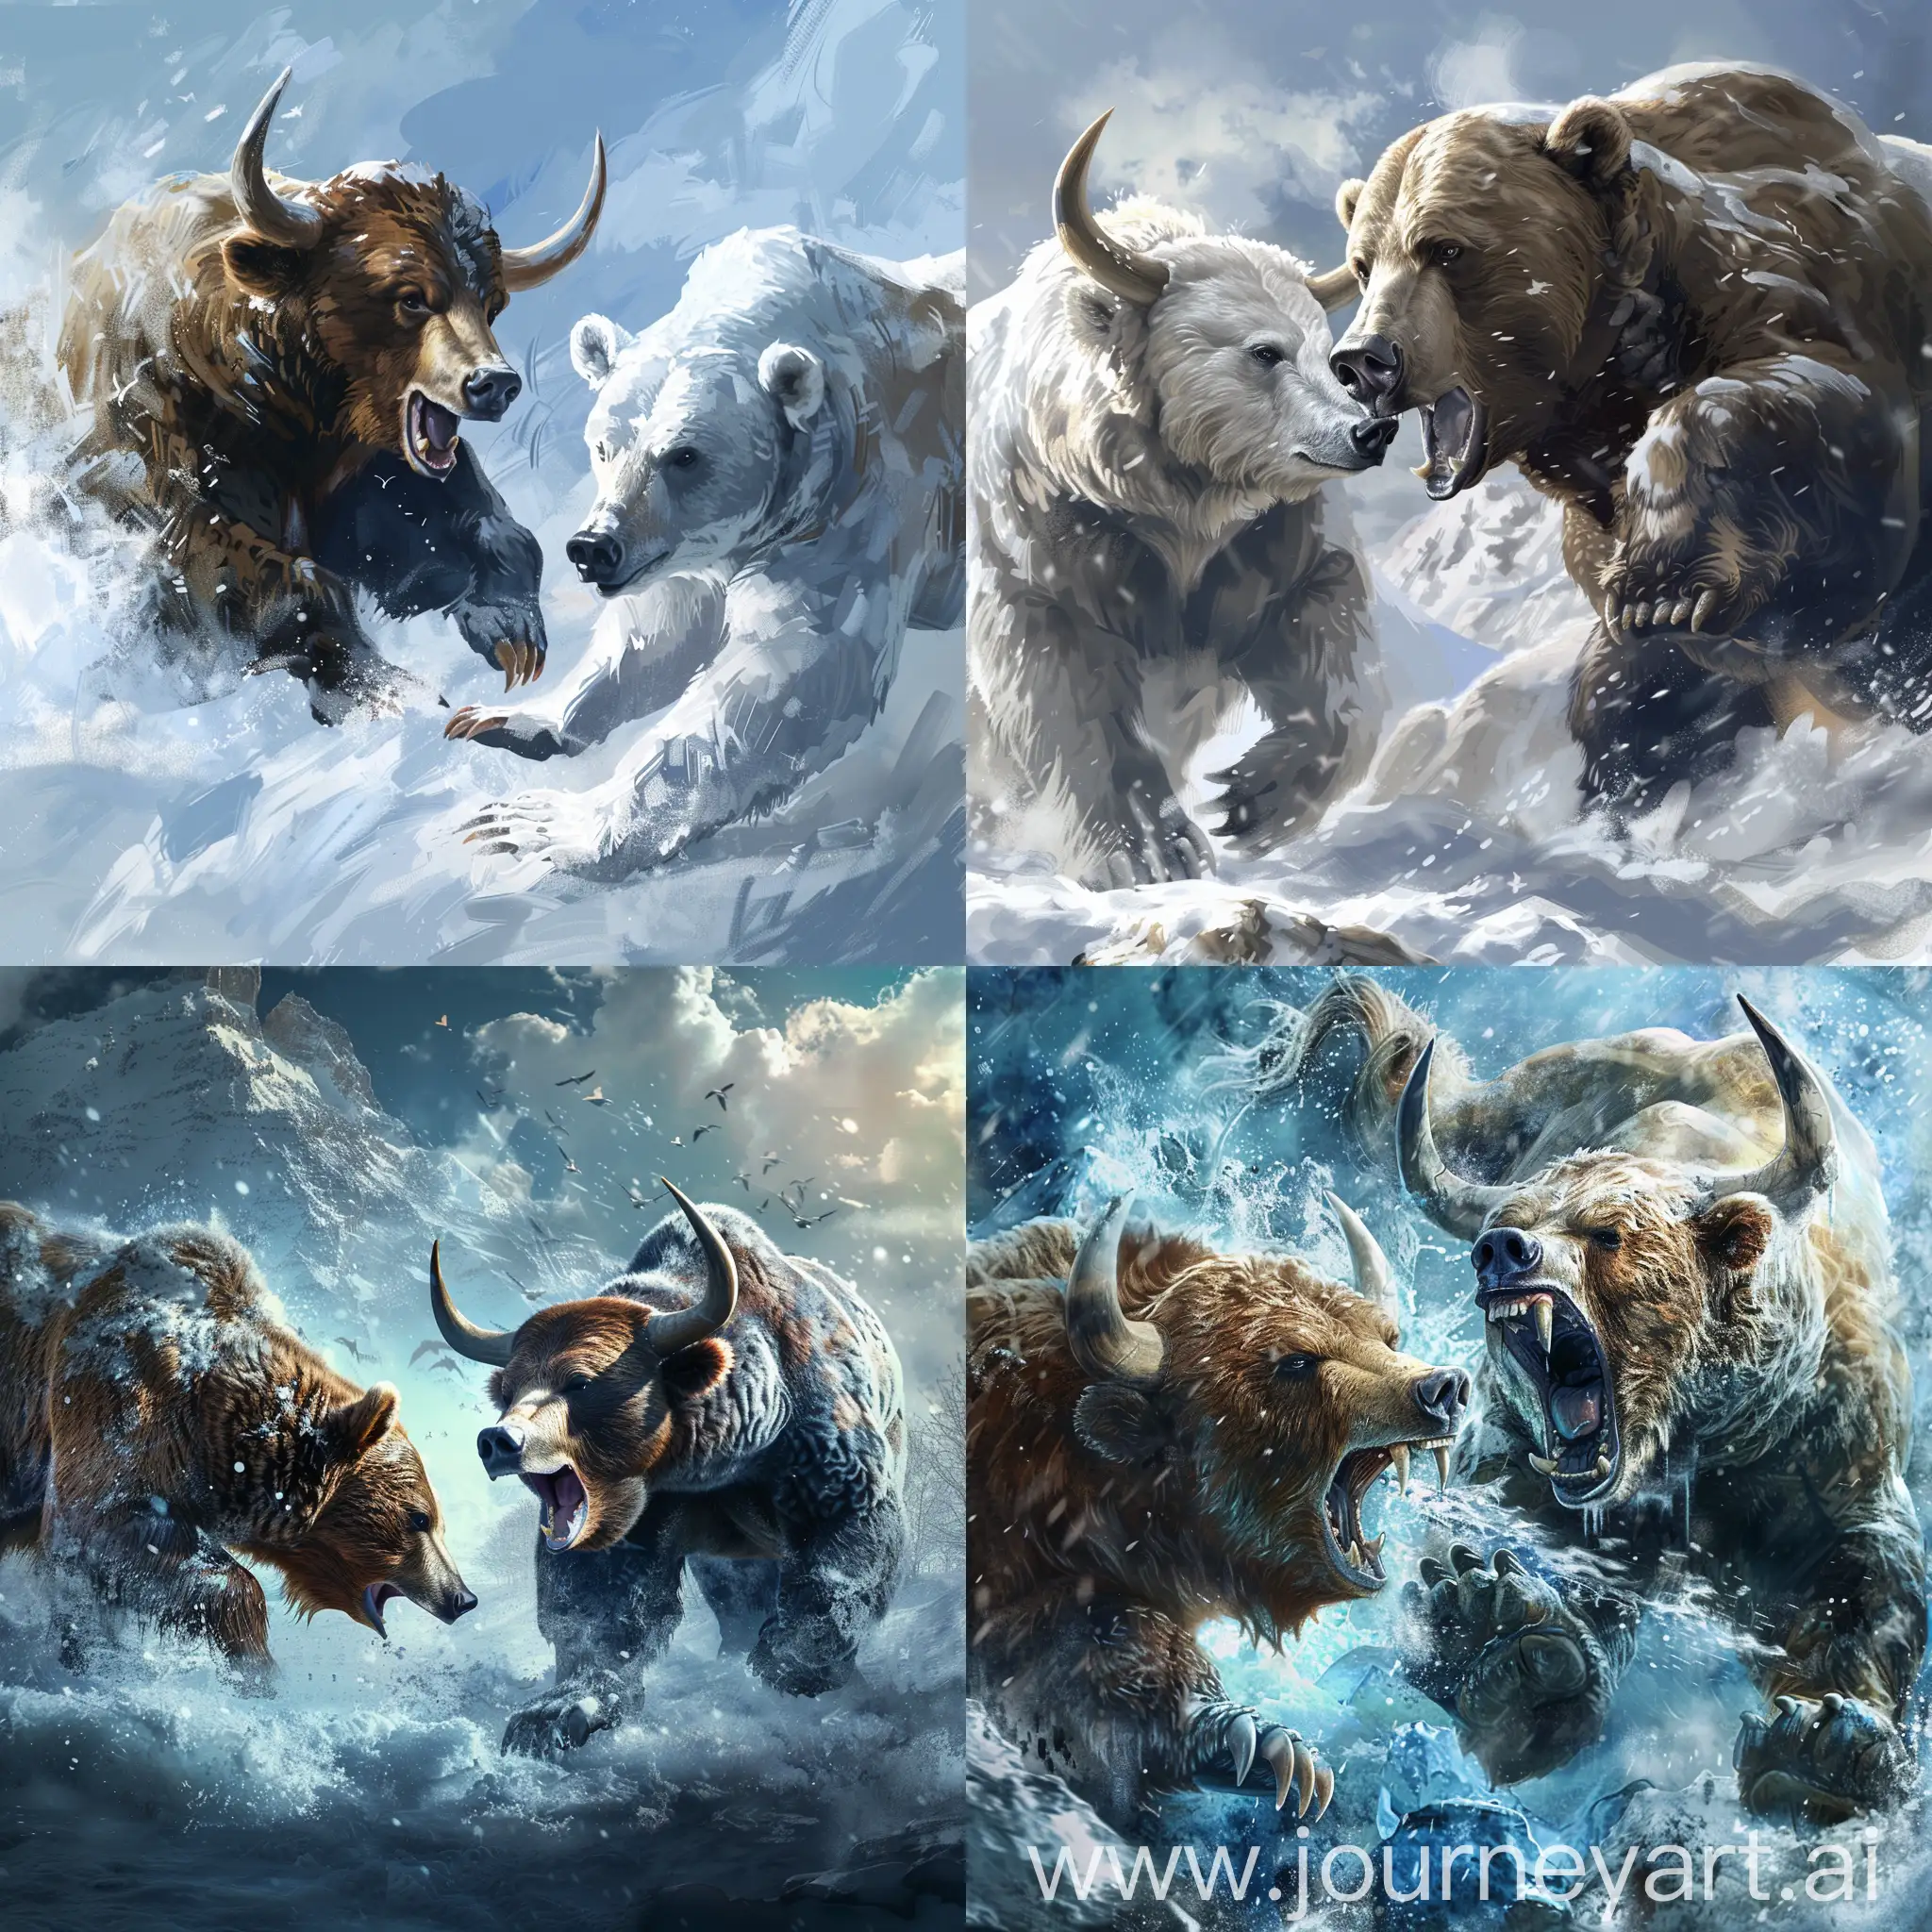 Frosty-Encounter-Between-Bull-and-Bear-in-Bull-and-Bear-Artwork